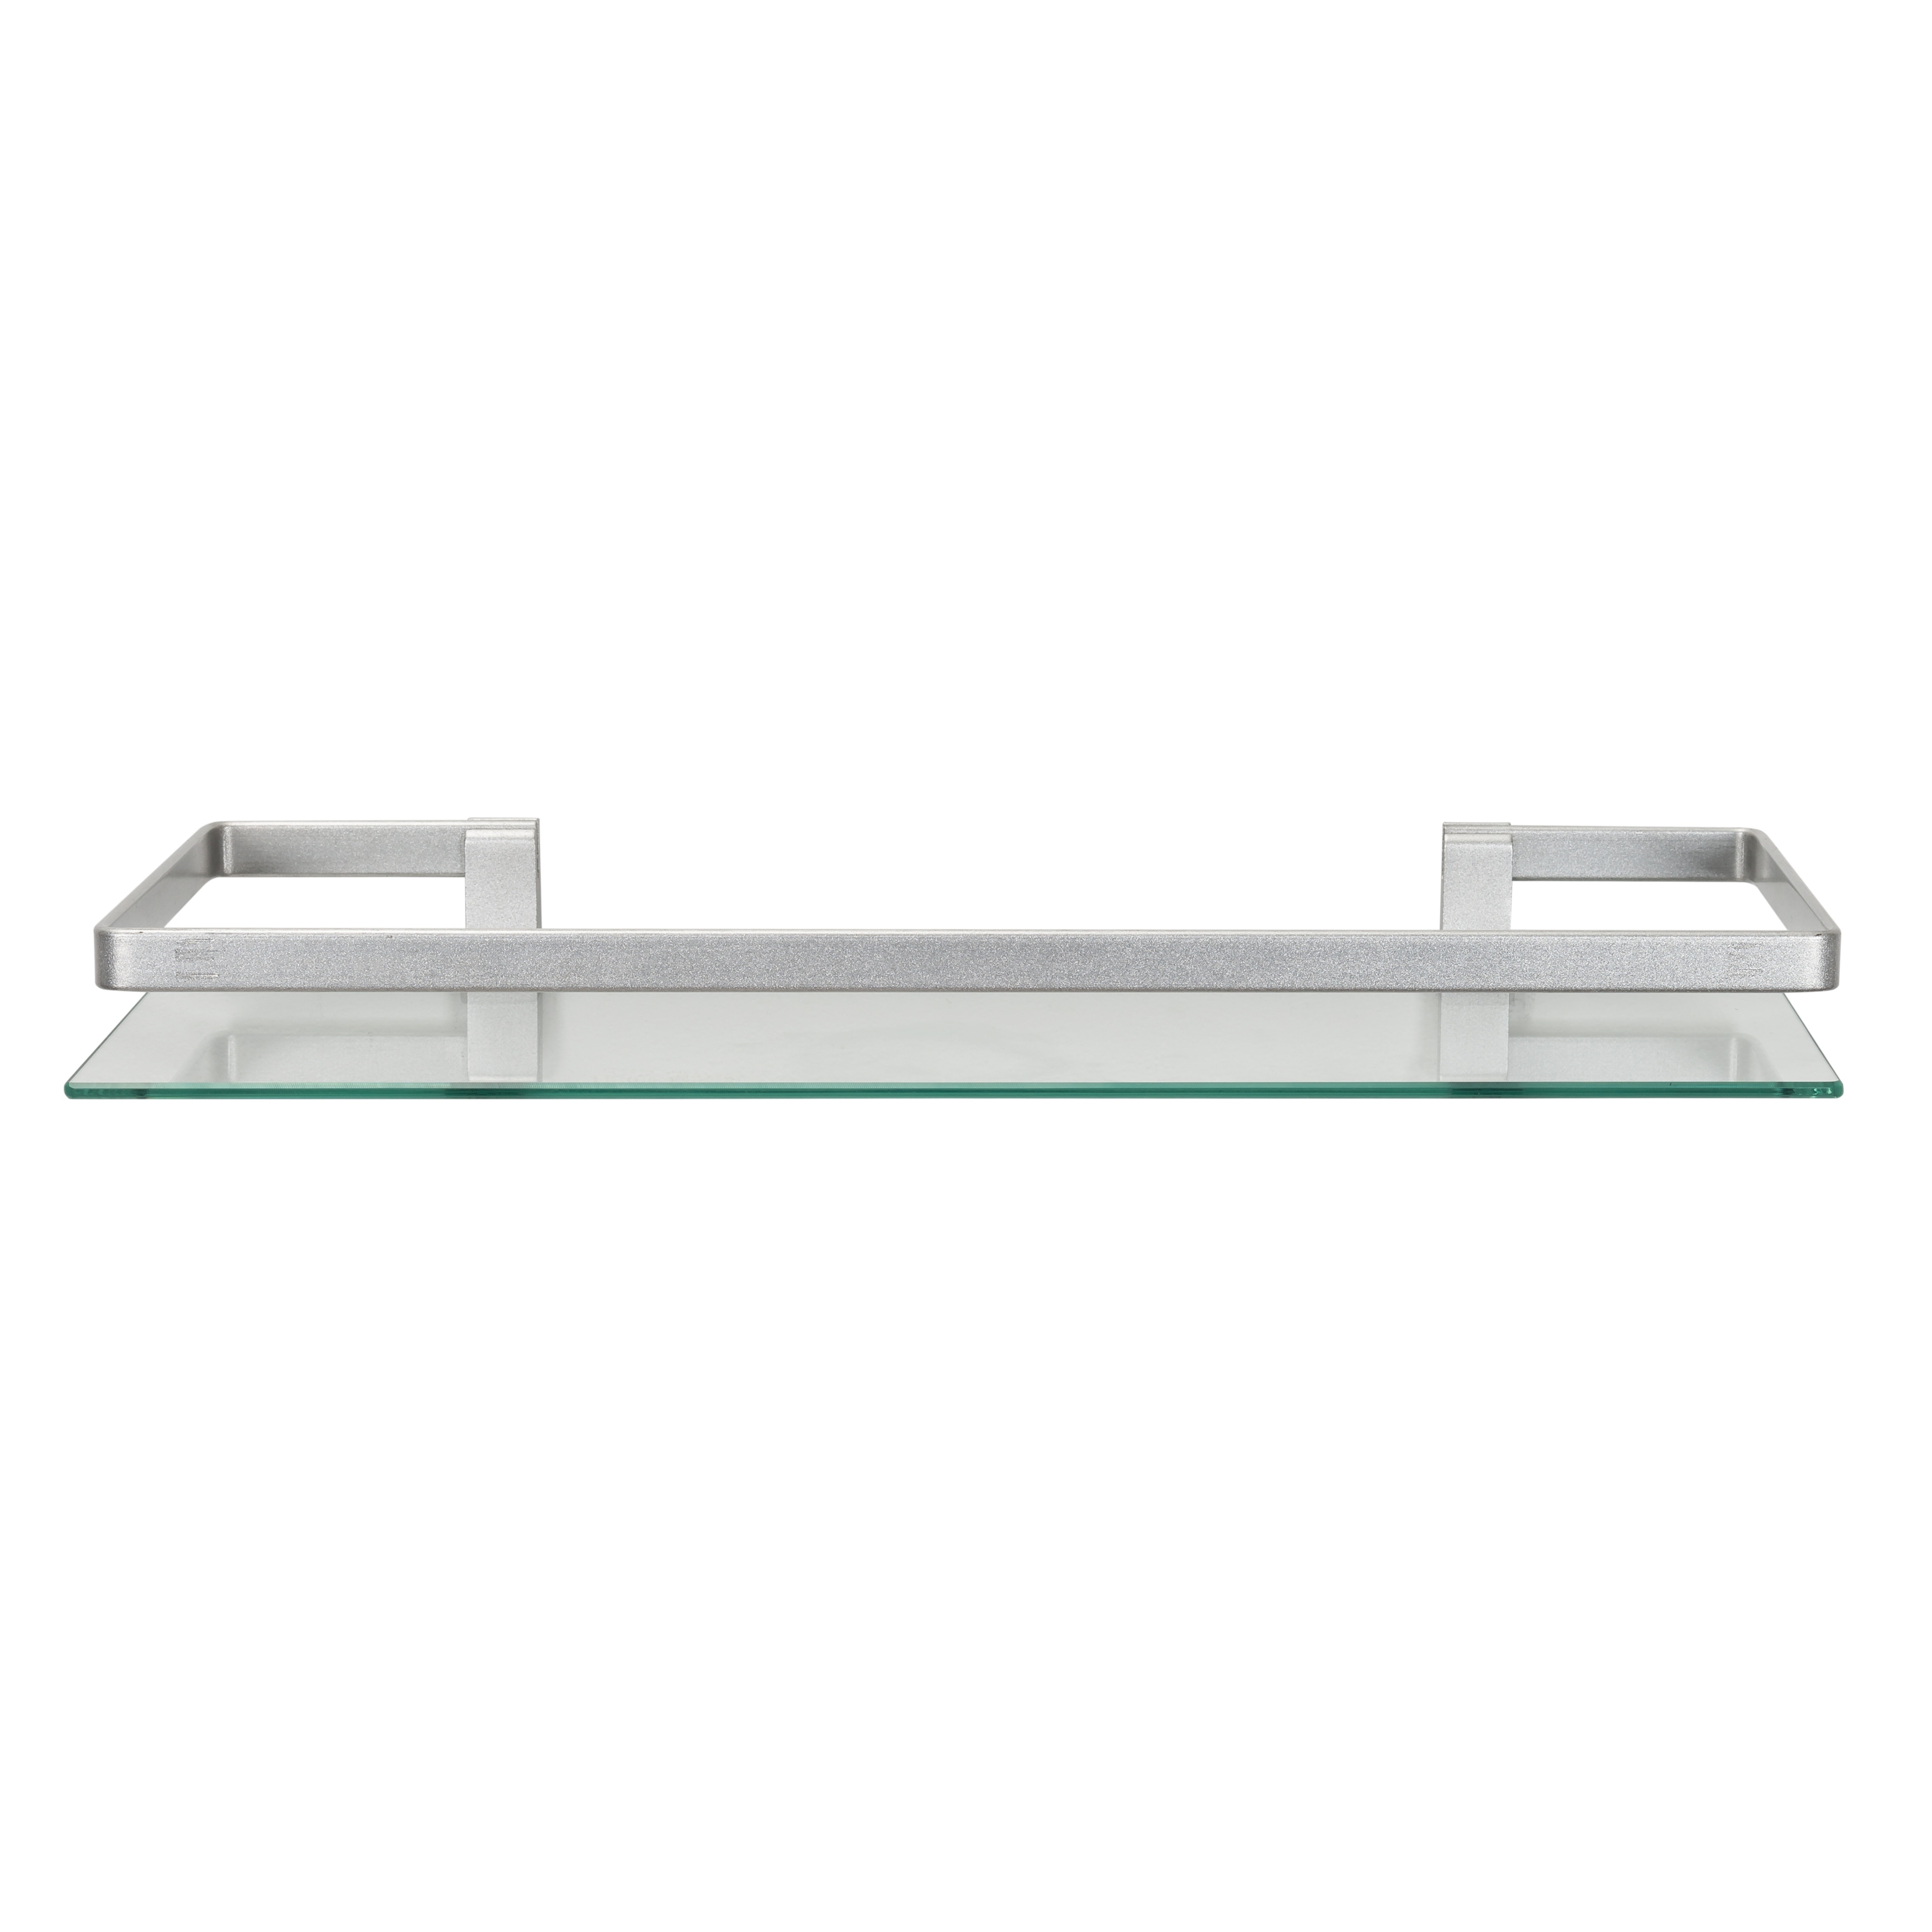 https://ak1.ostkcdn.com/images/products/is/images/direct/5b1817c50bf67172cd4e10aa45523142b9ef3a0f/Floating-Wall-Mount-Tempered-Glass-Bathroom-Shelf-with-Brushed-Chrome-Rail.jpg